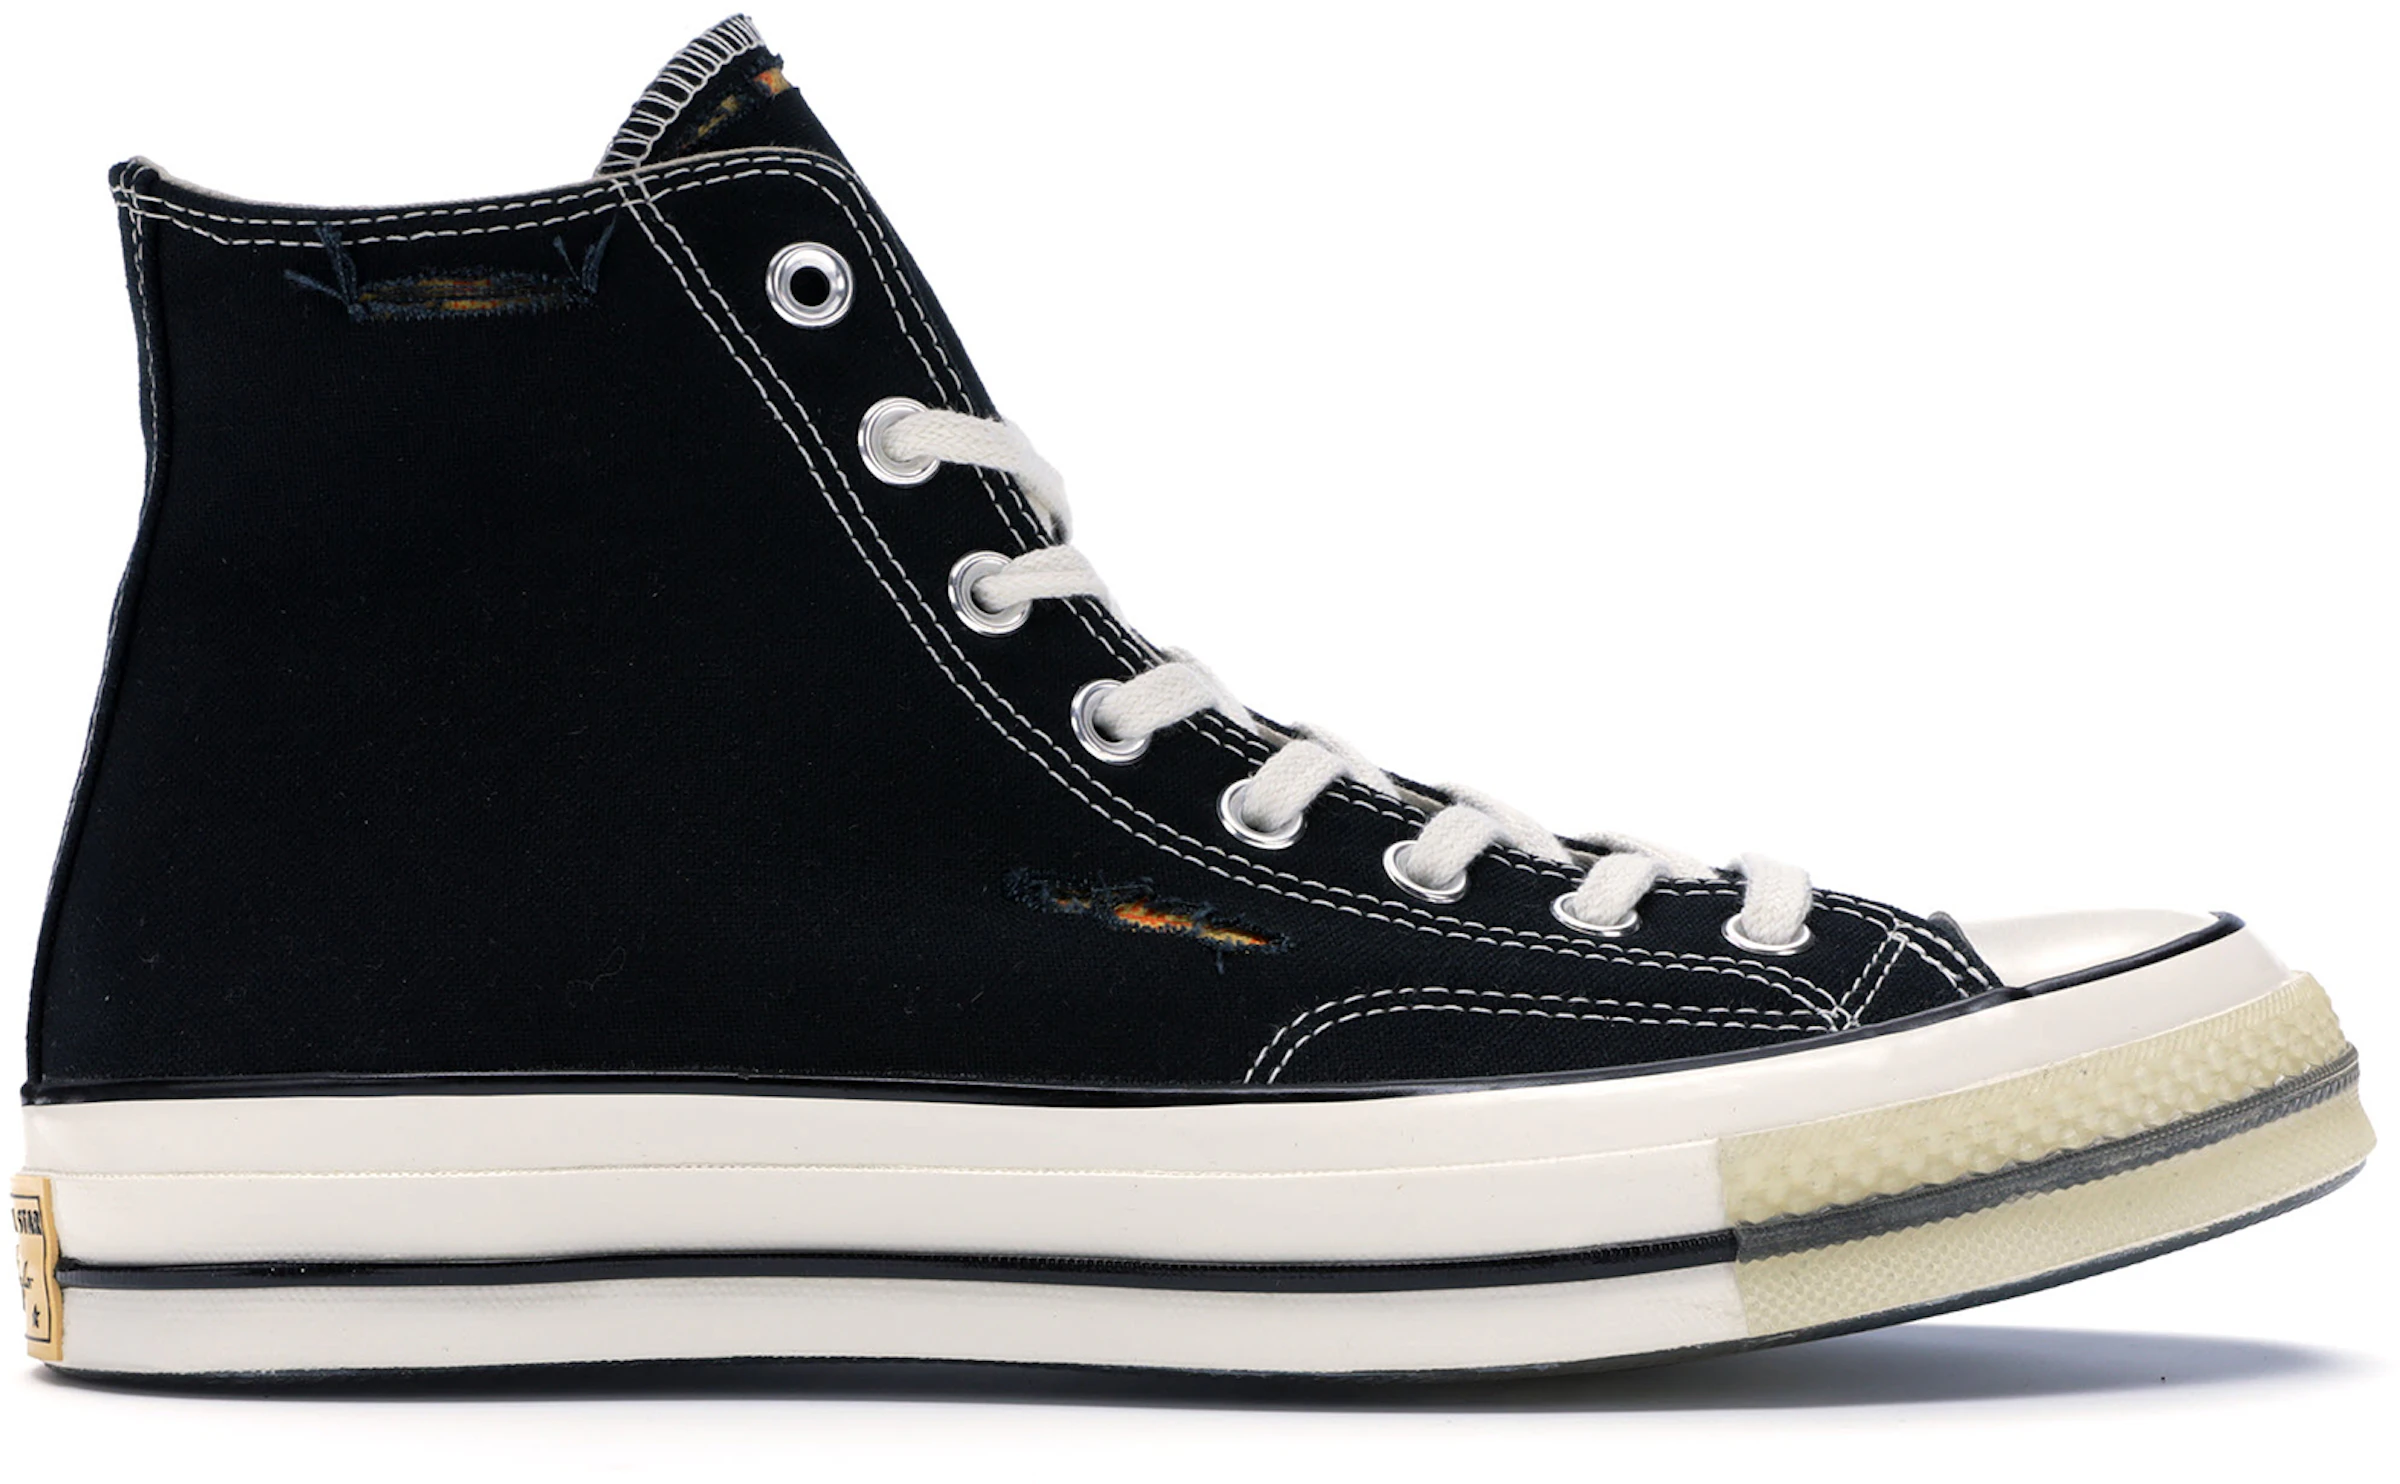 What To Wear With Black High Top Converse | lupon.gov.ph